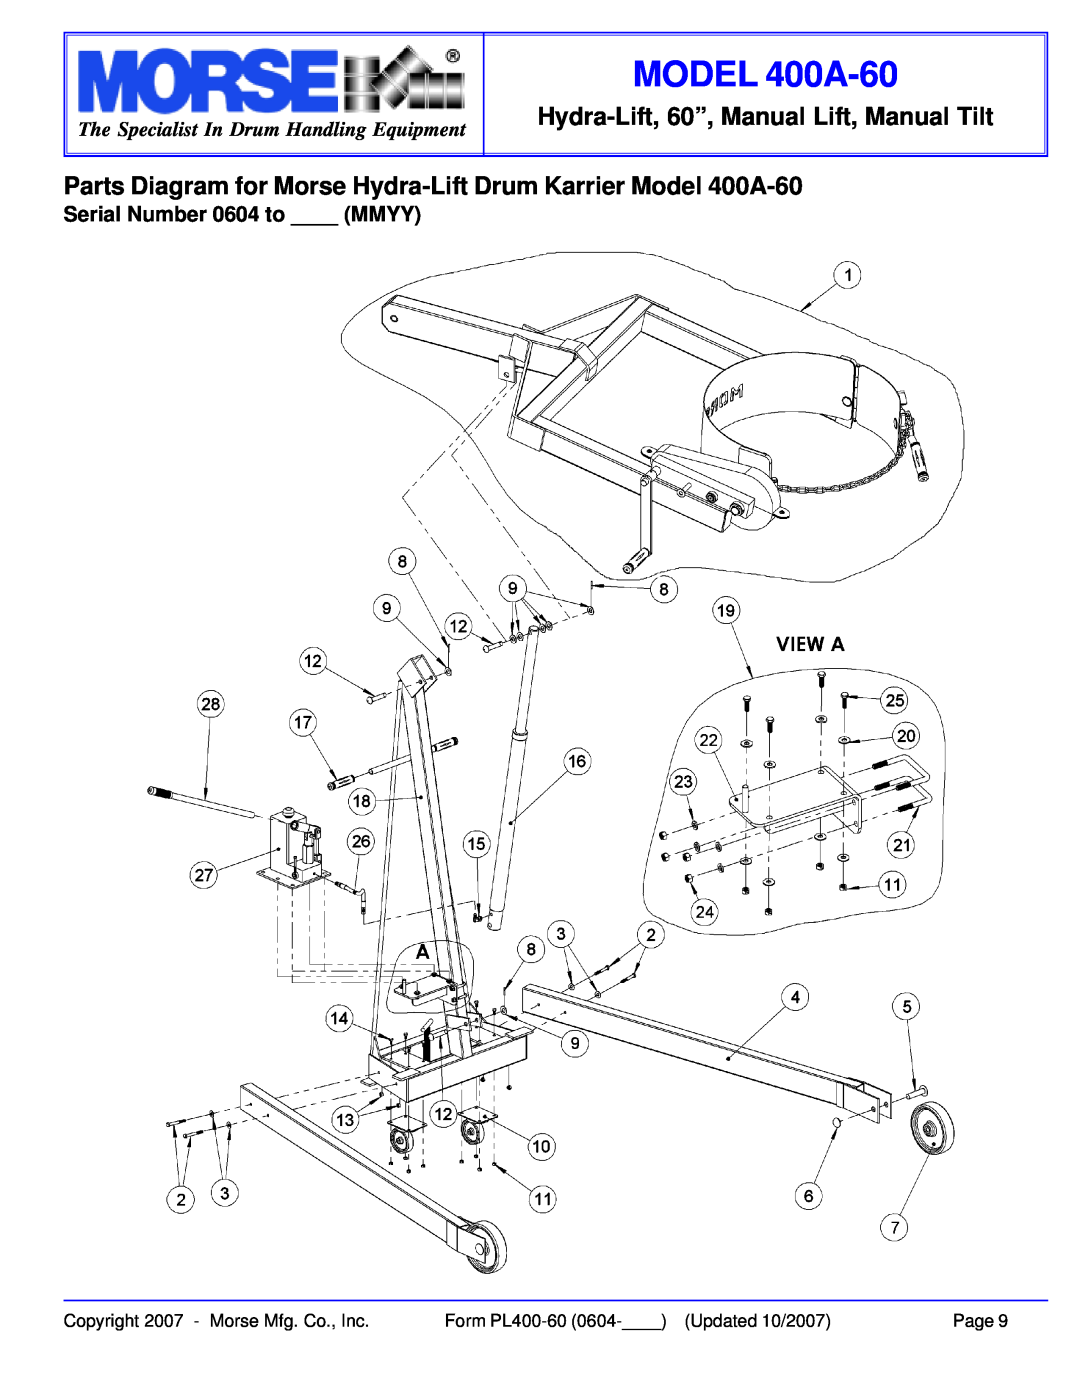 HydroSurge Parts Diagram for Morse Hydra-Lift Drum Karrier Model 400A-60, MODEL 400A-60, Serial Number 0604 to MMYY 